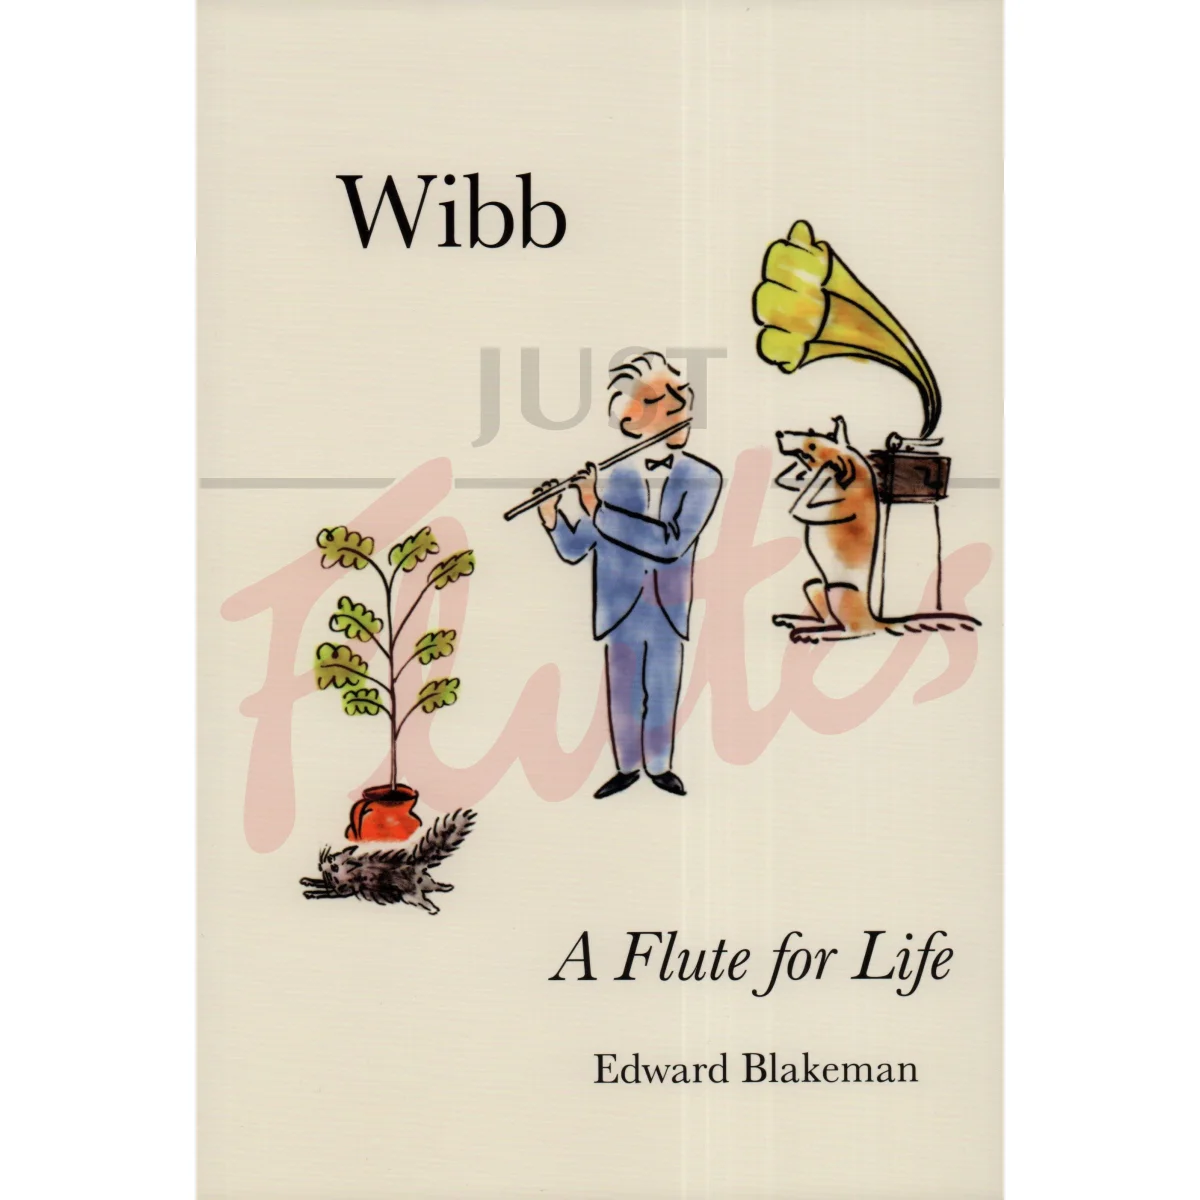 Wibb - A Flute for Life